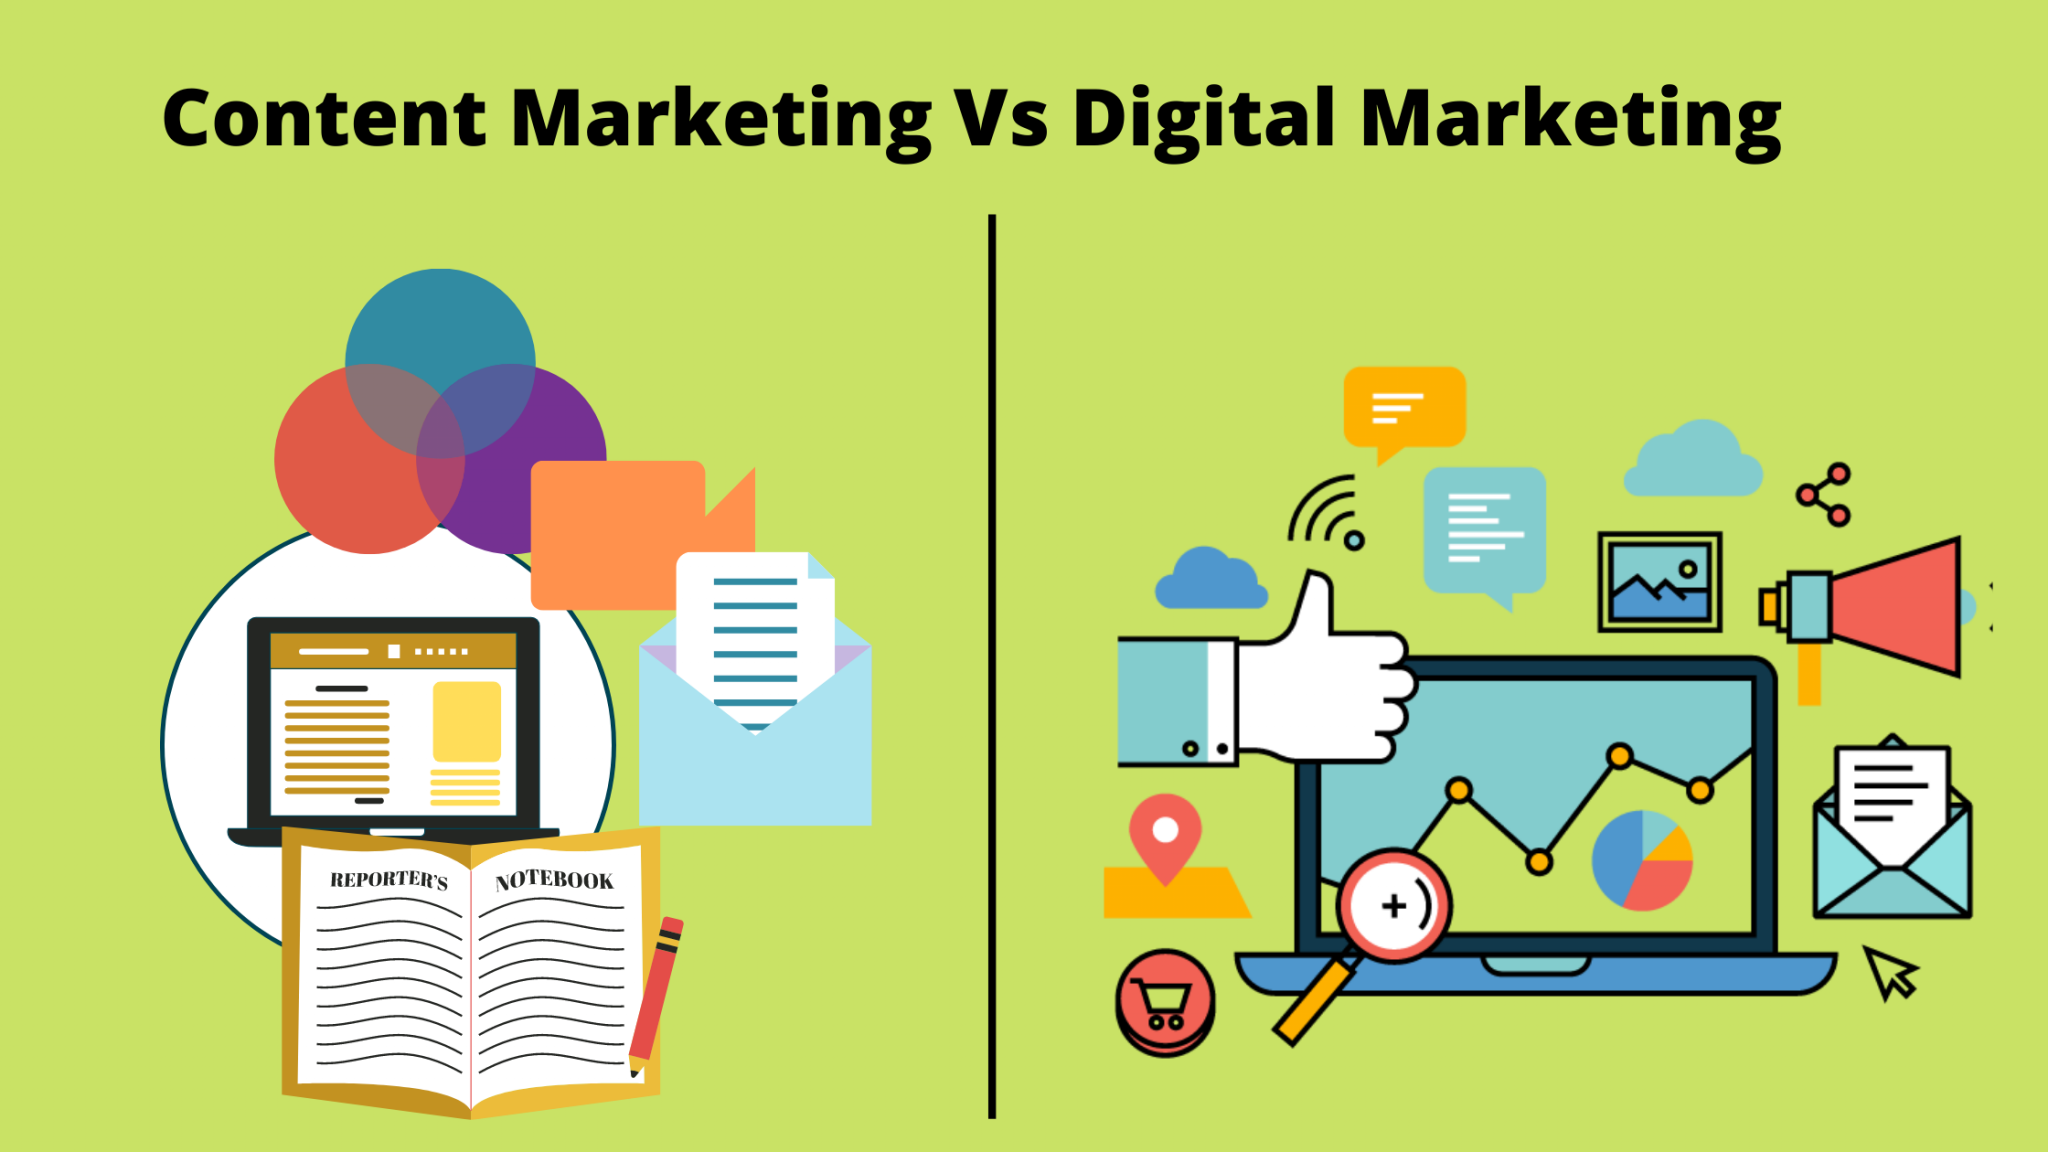 Content Marketing Vs Digital Marketing: The difference